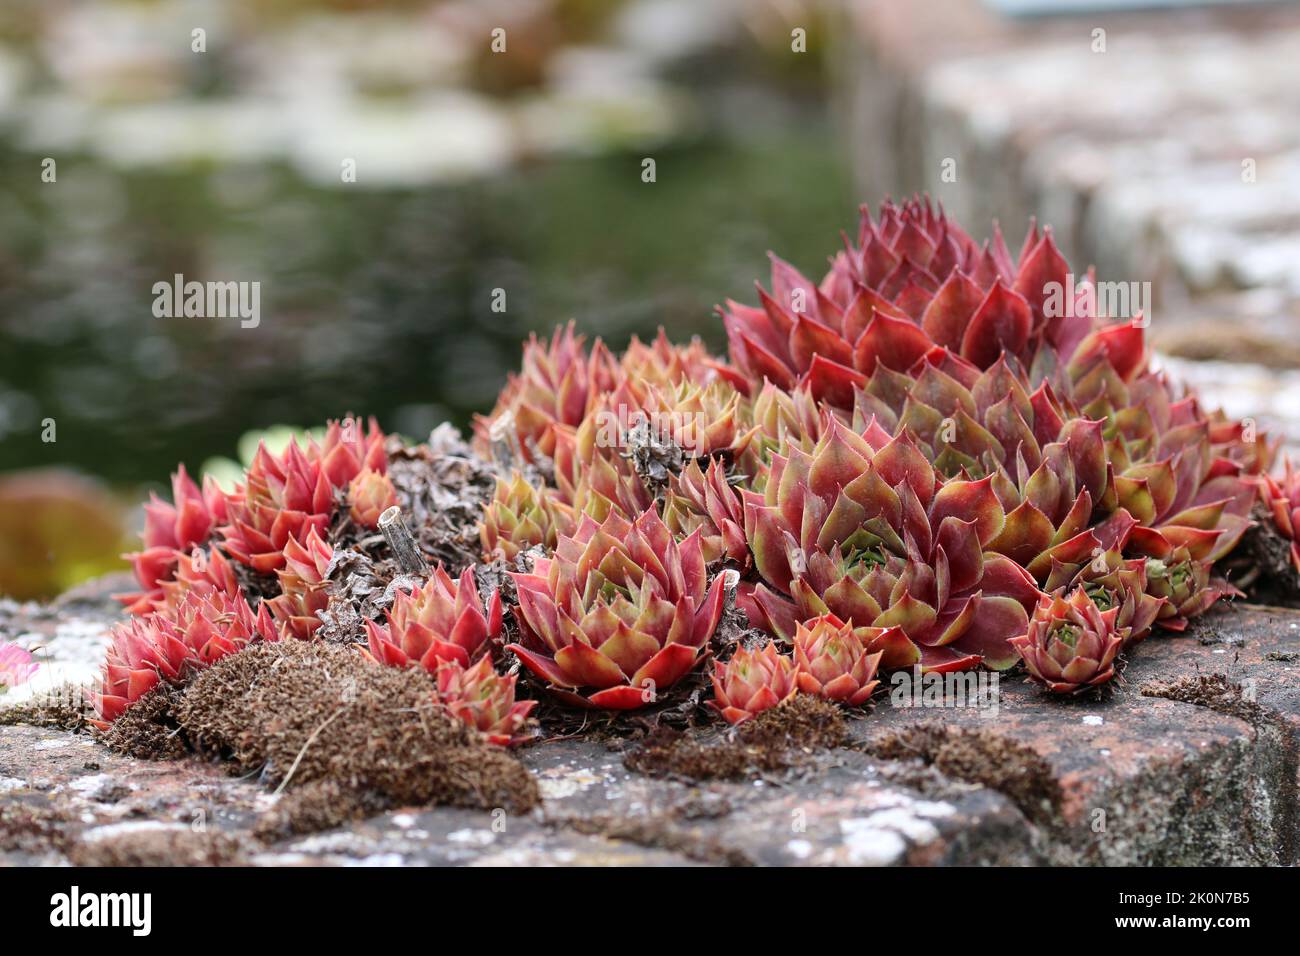 Houseleek plant, Sempervivum species, leaf rosettes in close up on a brick wall with a pond blurred in the background. Stock Photo